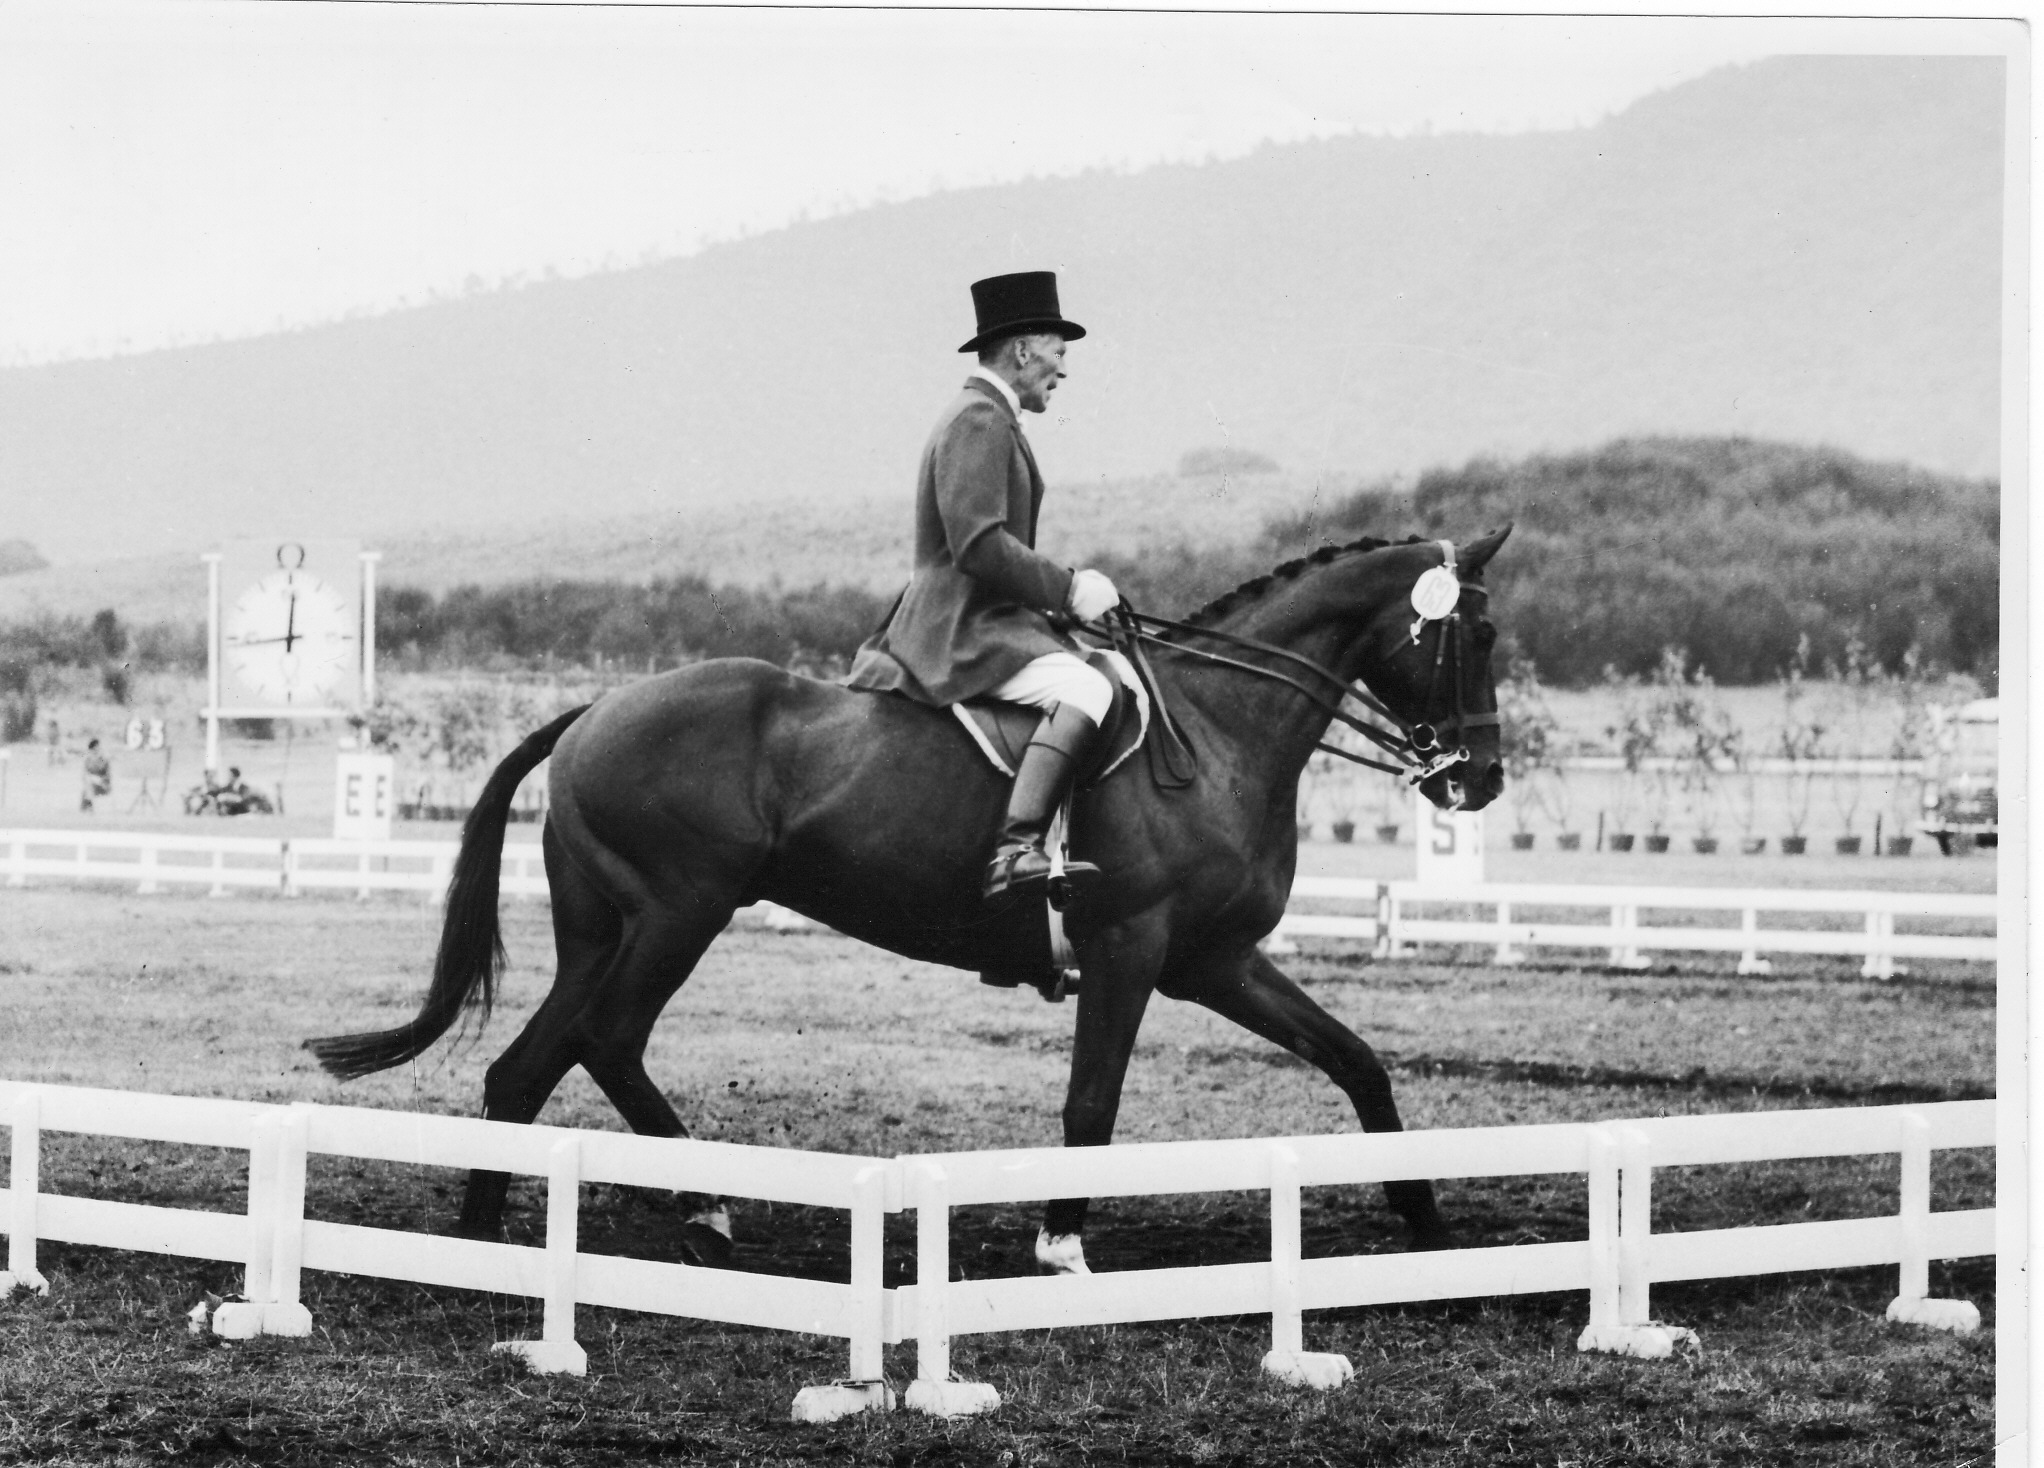 Laurie Morgan on Salad Days Olympic 3de dressage 1960